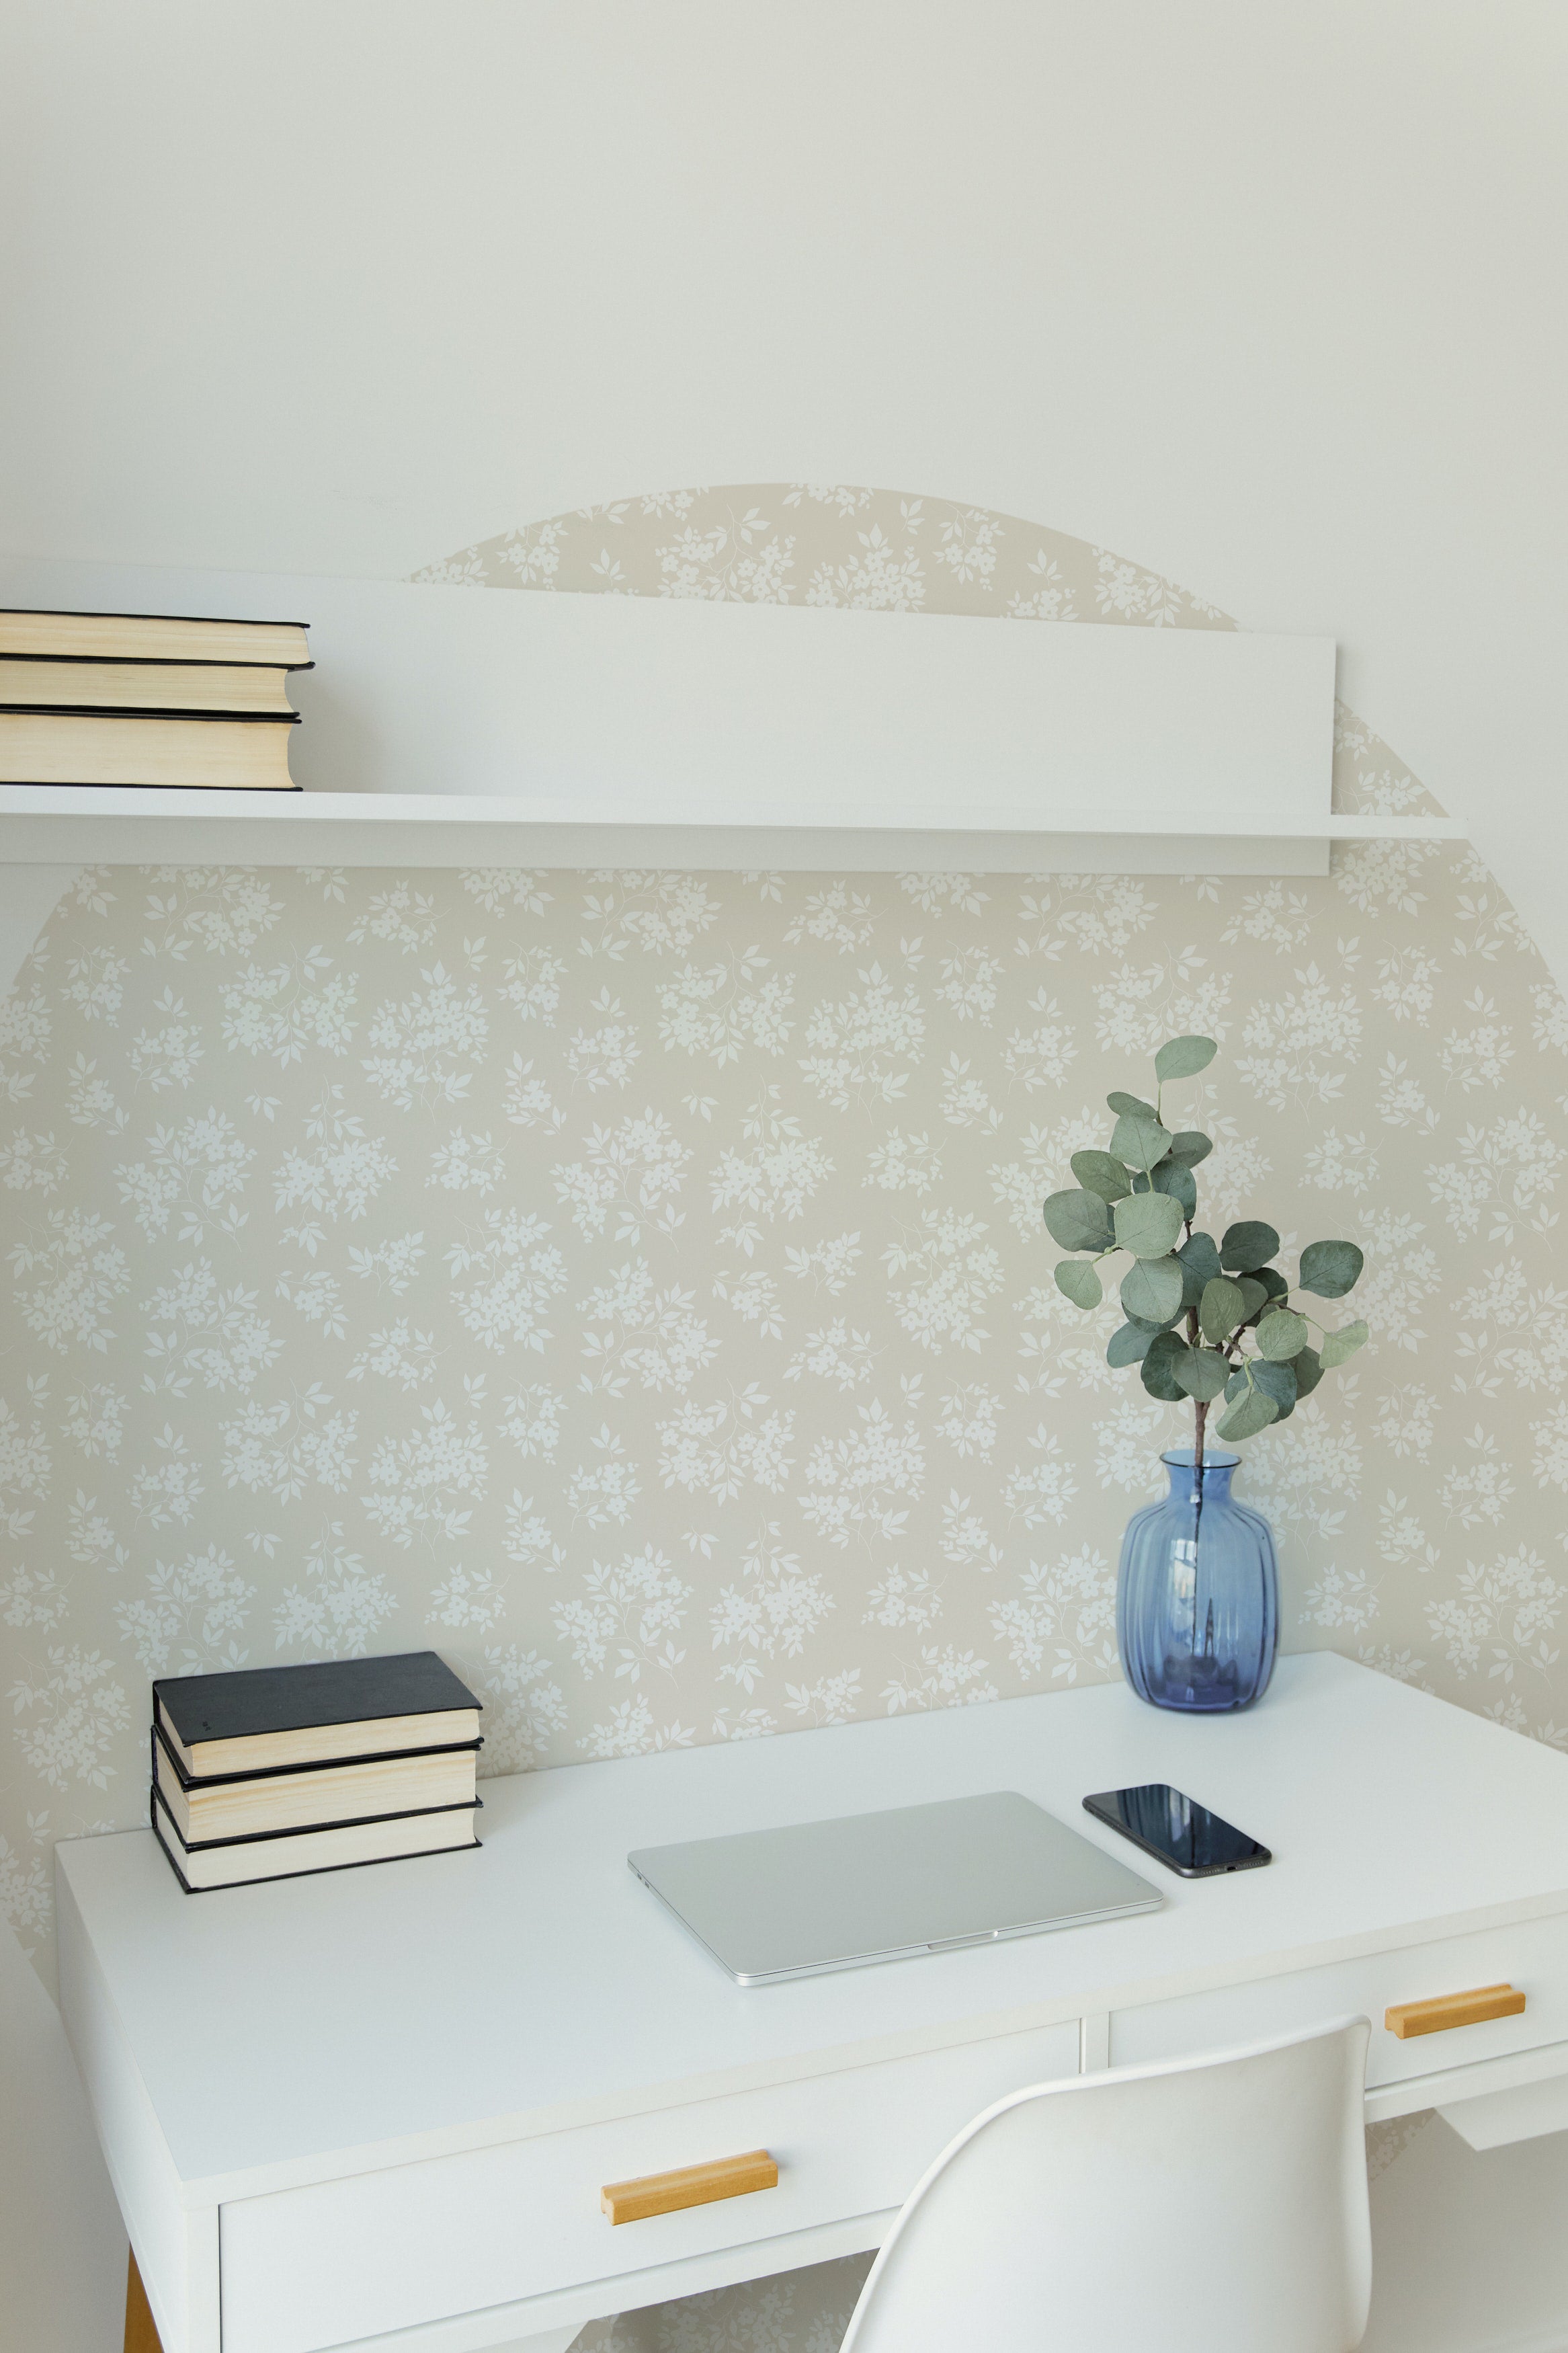 A minimalist home office setup with a white desk and chair against a wall covered with Vintage Garden Floral Wallpaper in ecru, showcasing a subtle floral pattern. The wallpaper imparts an elegant backdrop to the simple white shelf holding books, a blue vase with eucalyptus branches, a closed laptop, and a smartphone.